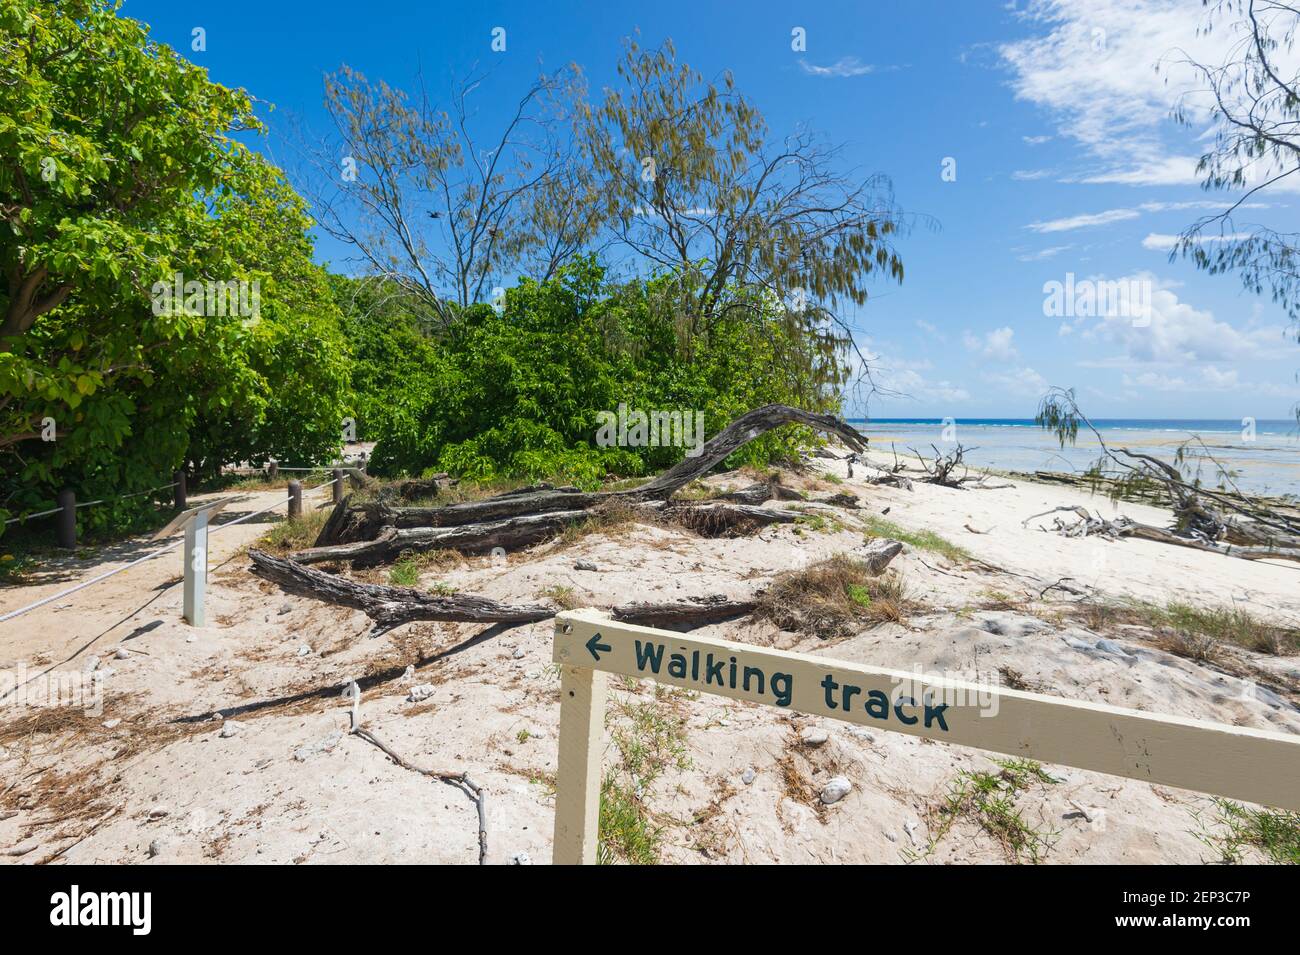 Walking track on Lady Musgrave Island, a World Heritage National Park in the Capricorn-Bunker group,  Southern Great Barrier Reef, Queensland, QLD, Au Stock Photo